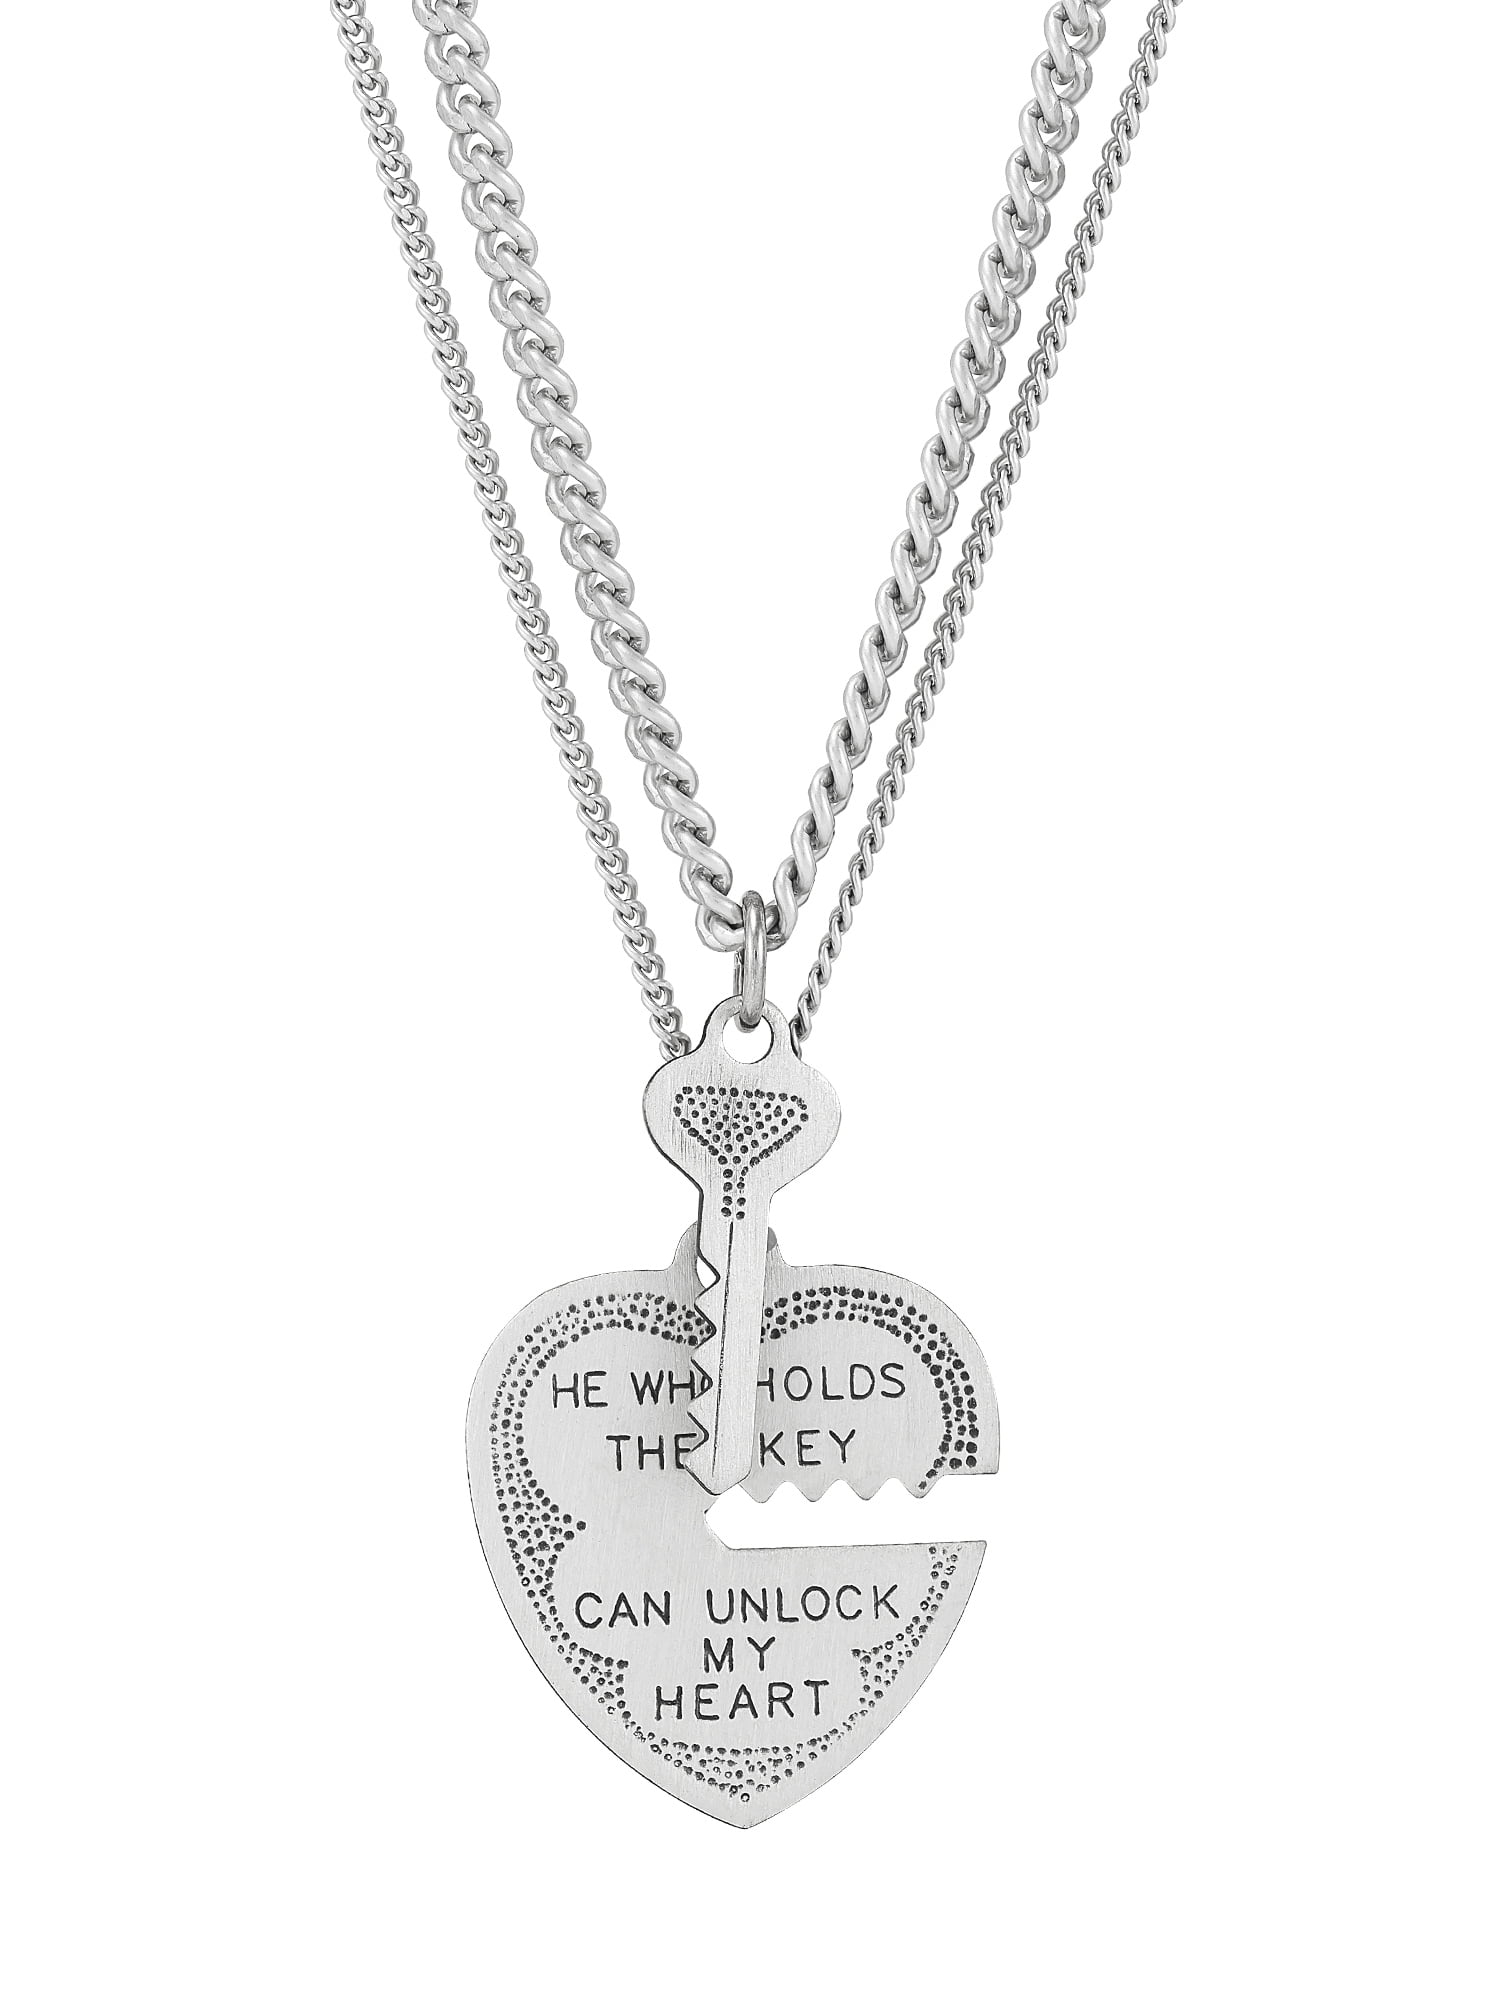 925 Sterling Silver New Fashion Key Unlock My Heart Necklace Pendant + Chain 